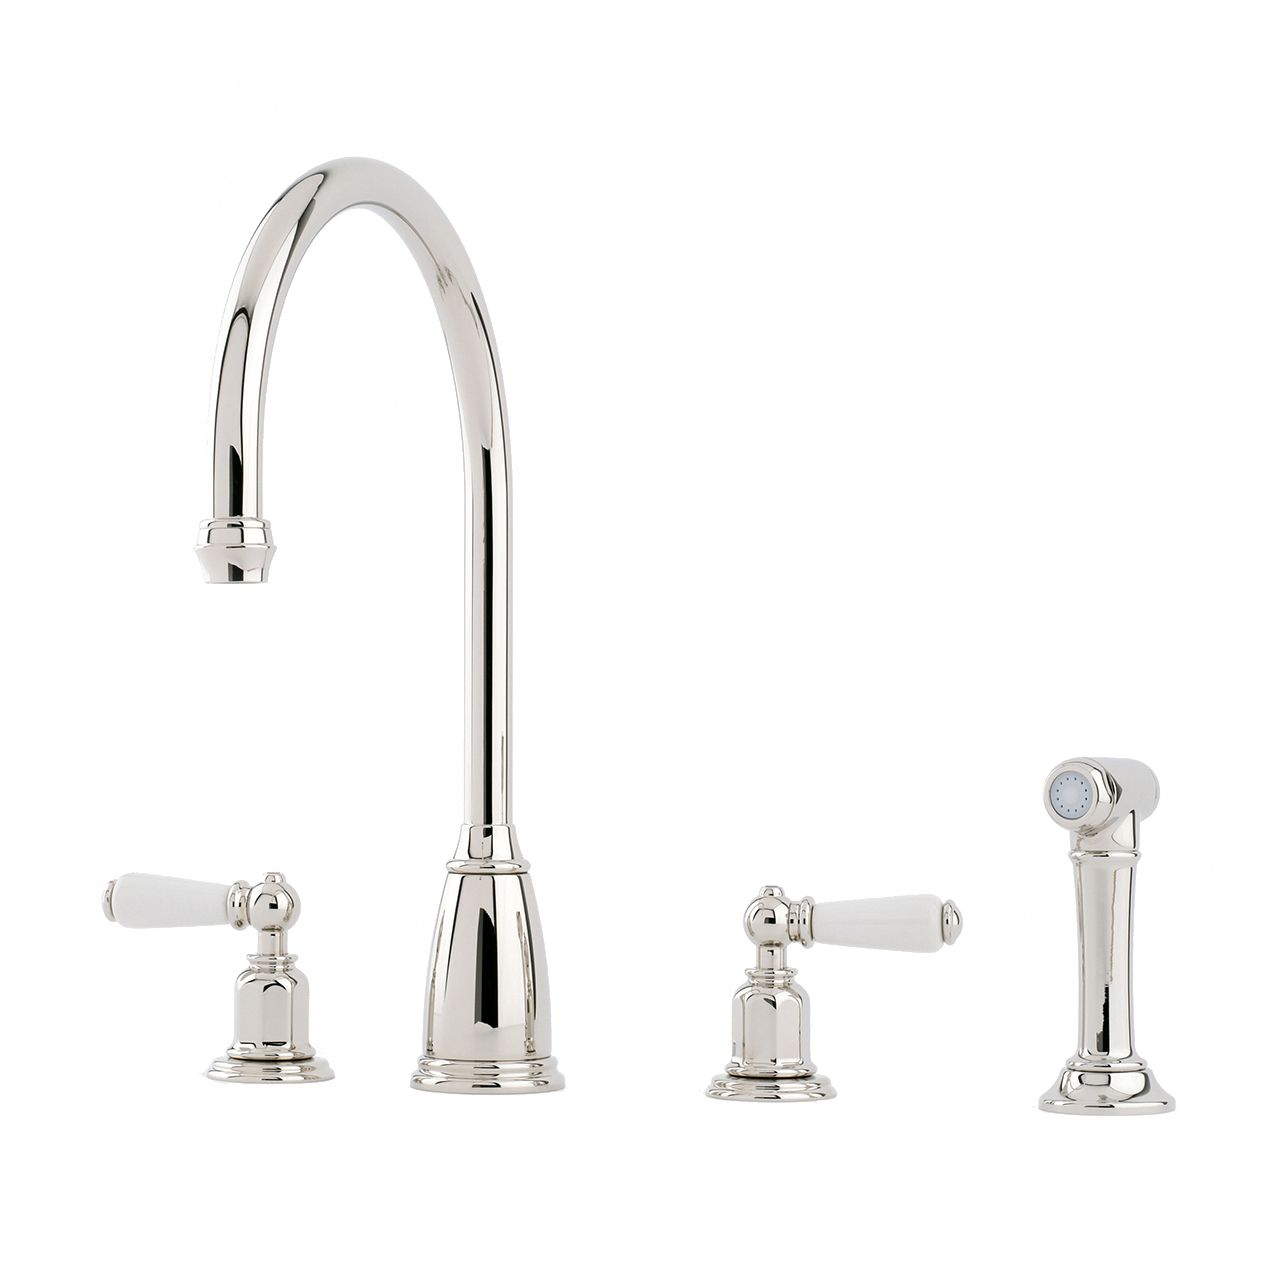 Phoenician 4 hole Sink Mixer with Lever Handles and Rinse – Perrin & Rowe